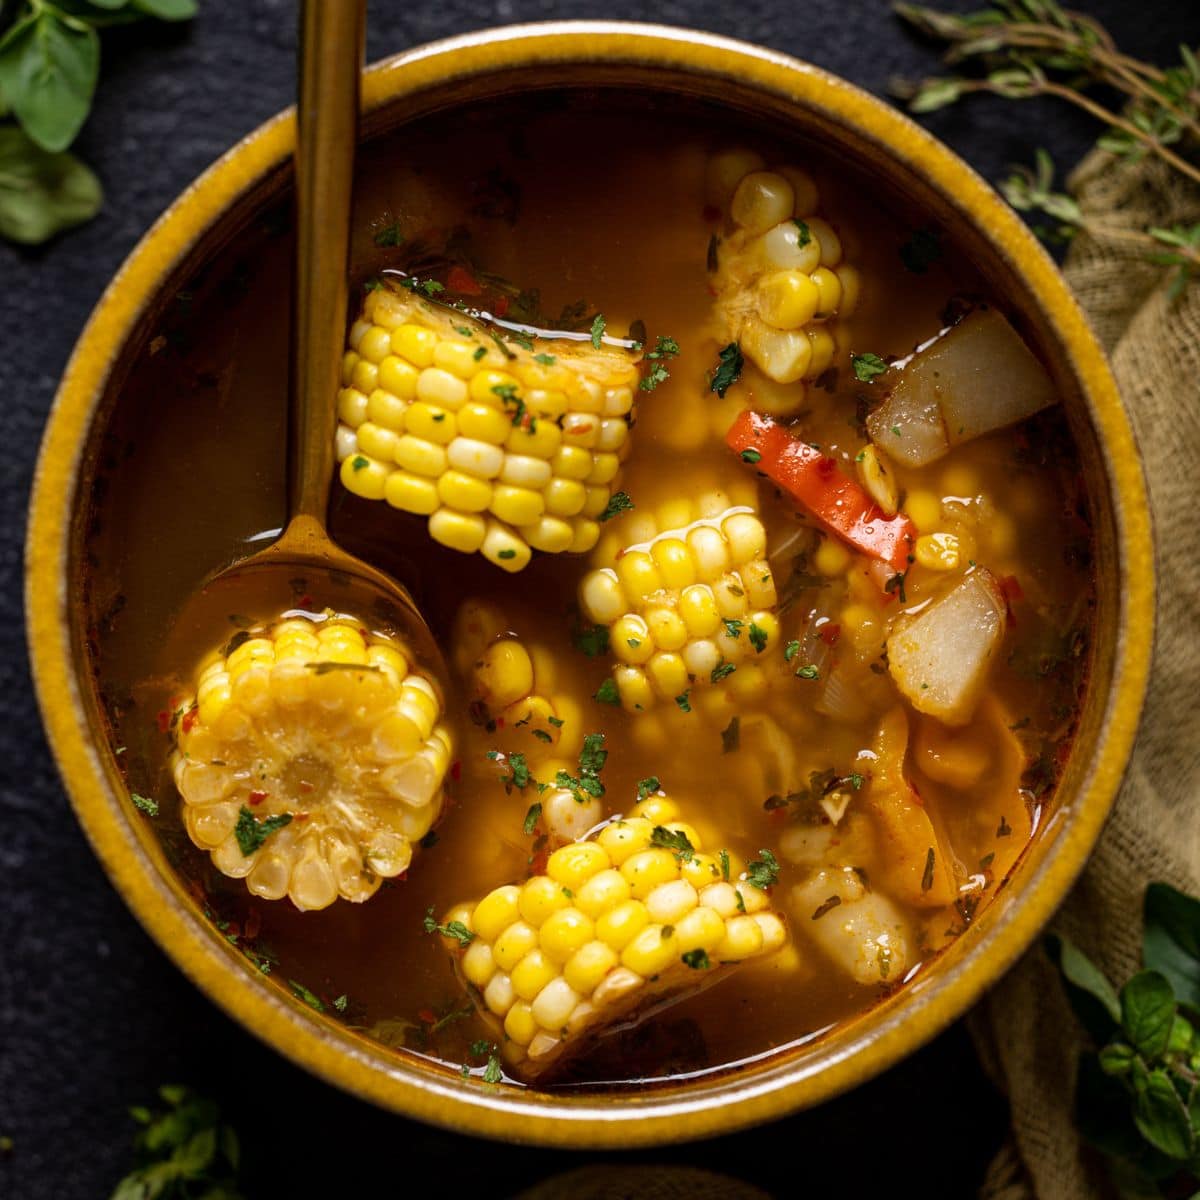 Corn soup in a wooden bowl with a spoon.